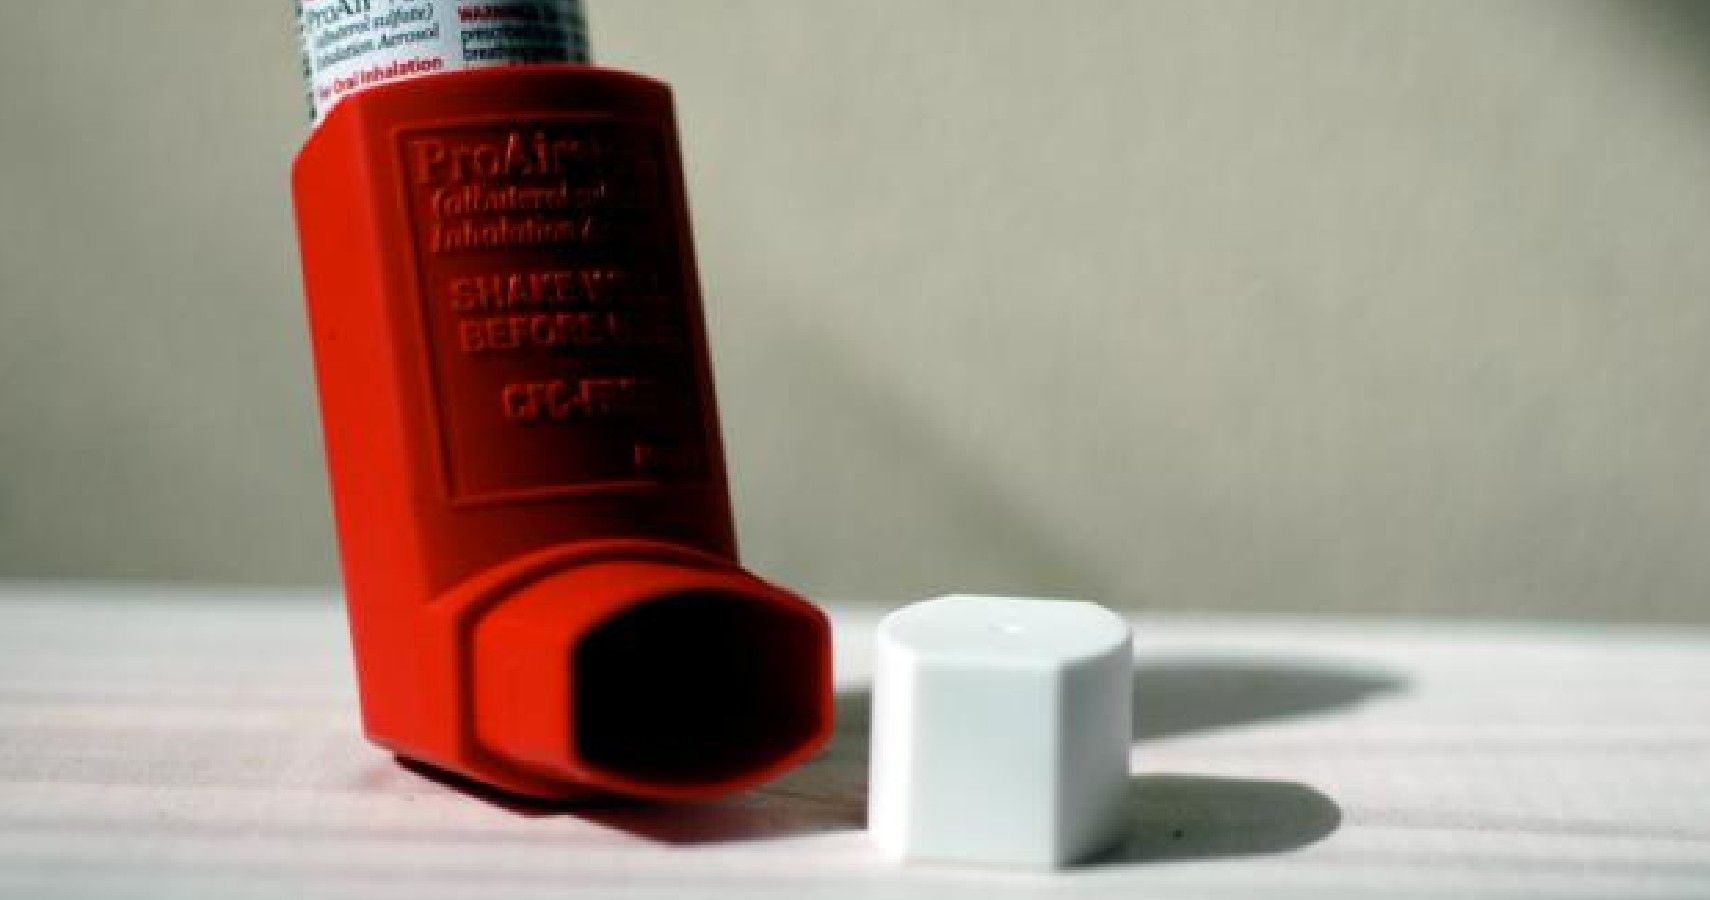 Bronchiolitis In Infants Has Varying Asthma Risks Depending On Subgroup: Study